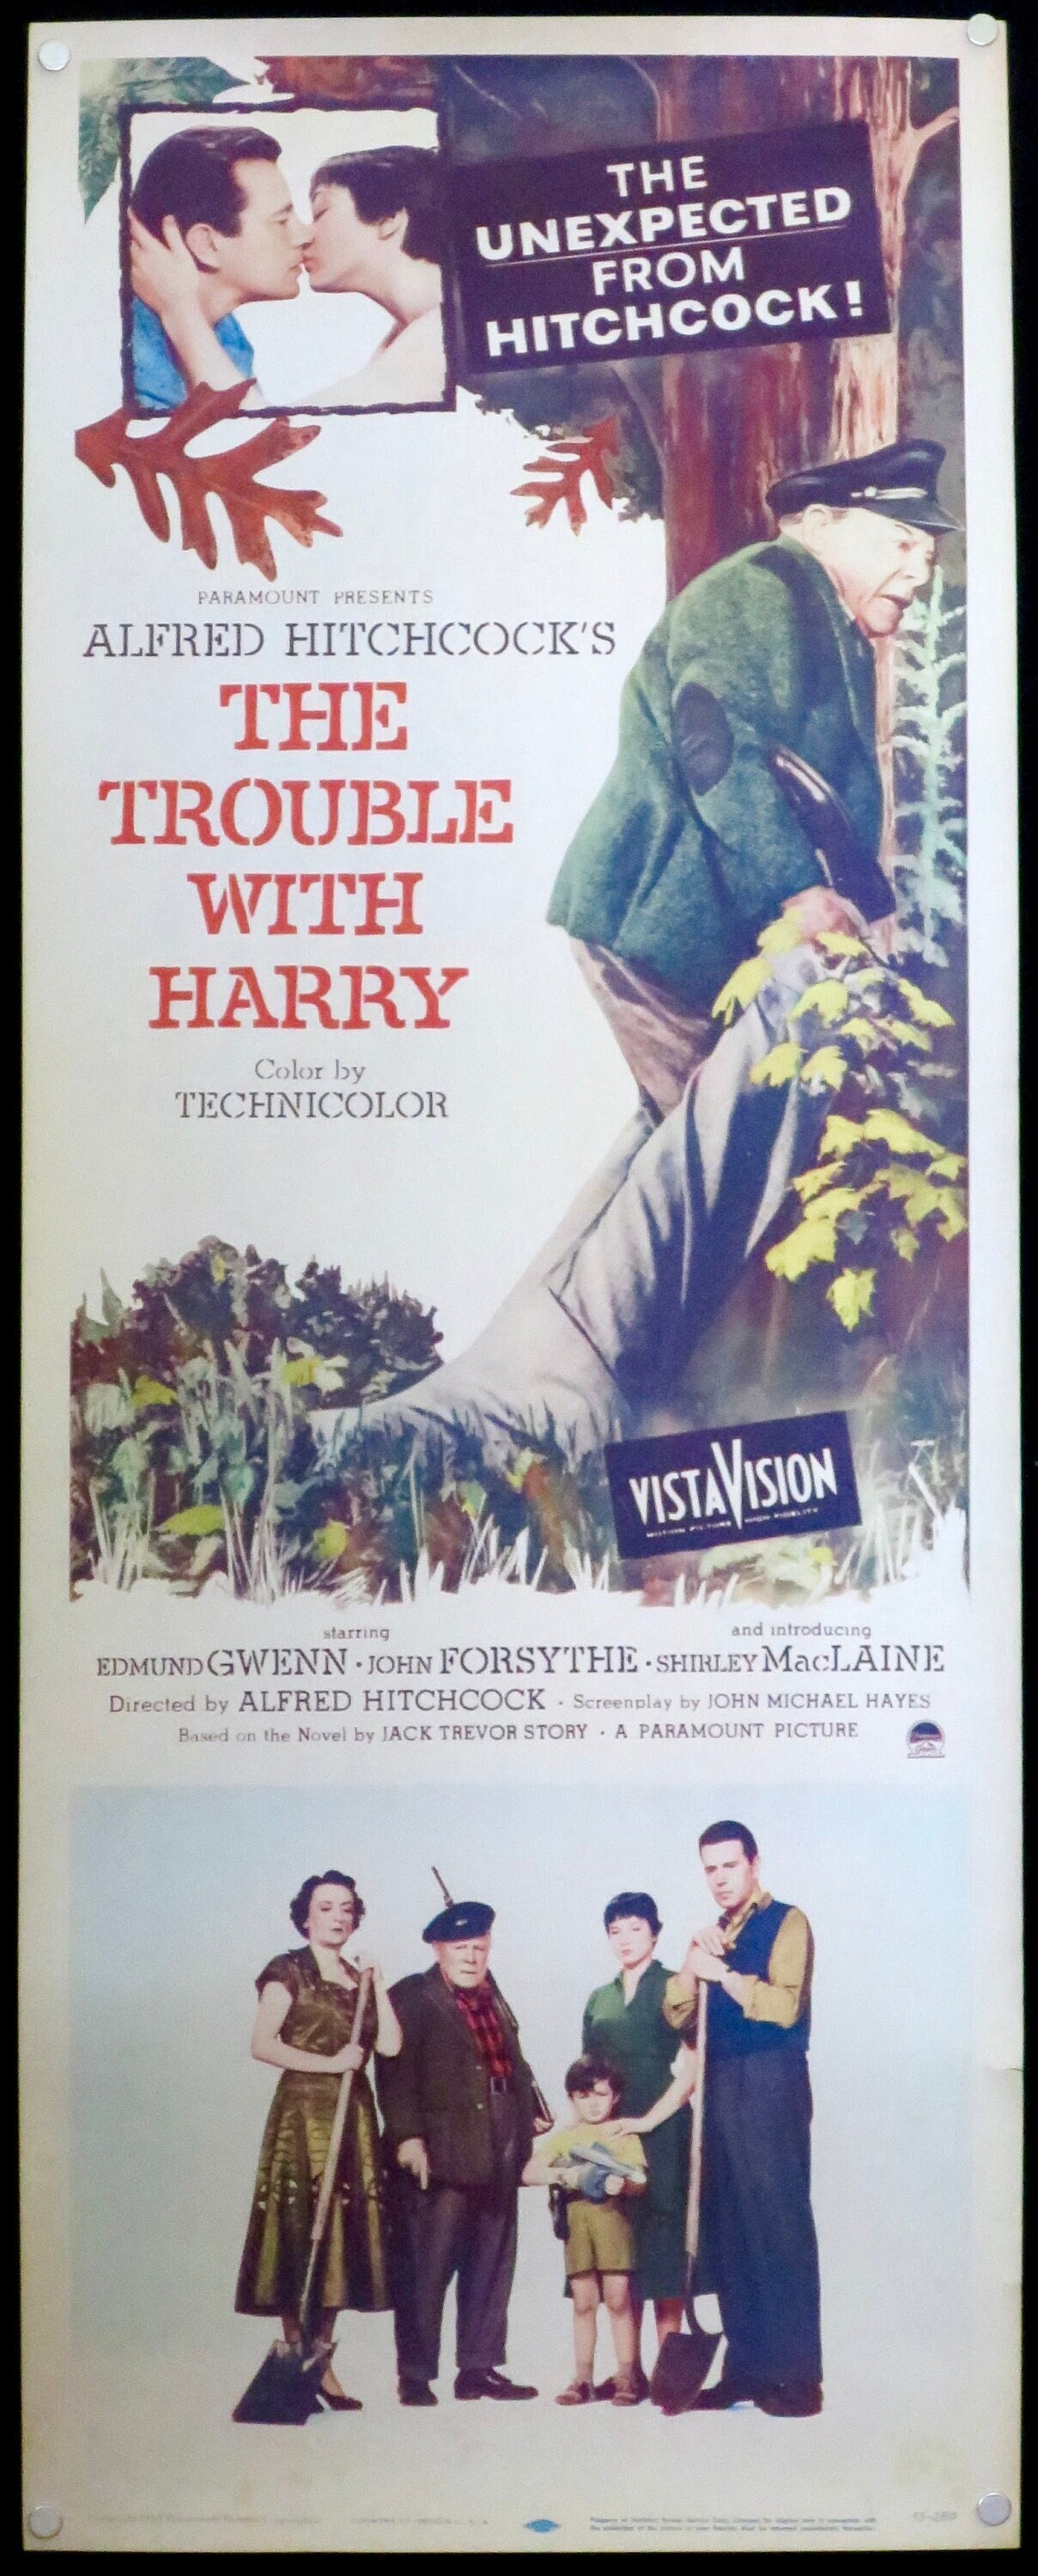 ALFRED HITCHCOCK'S The Trouble With Harry Rolled 1955 Orig 14x36 Insert - VG Cond Unfolded - Shirley MacLaine!